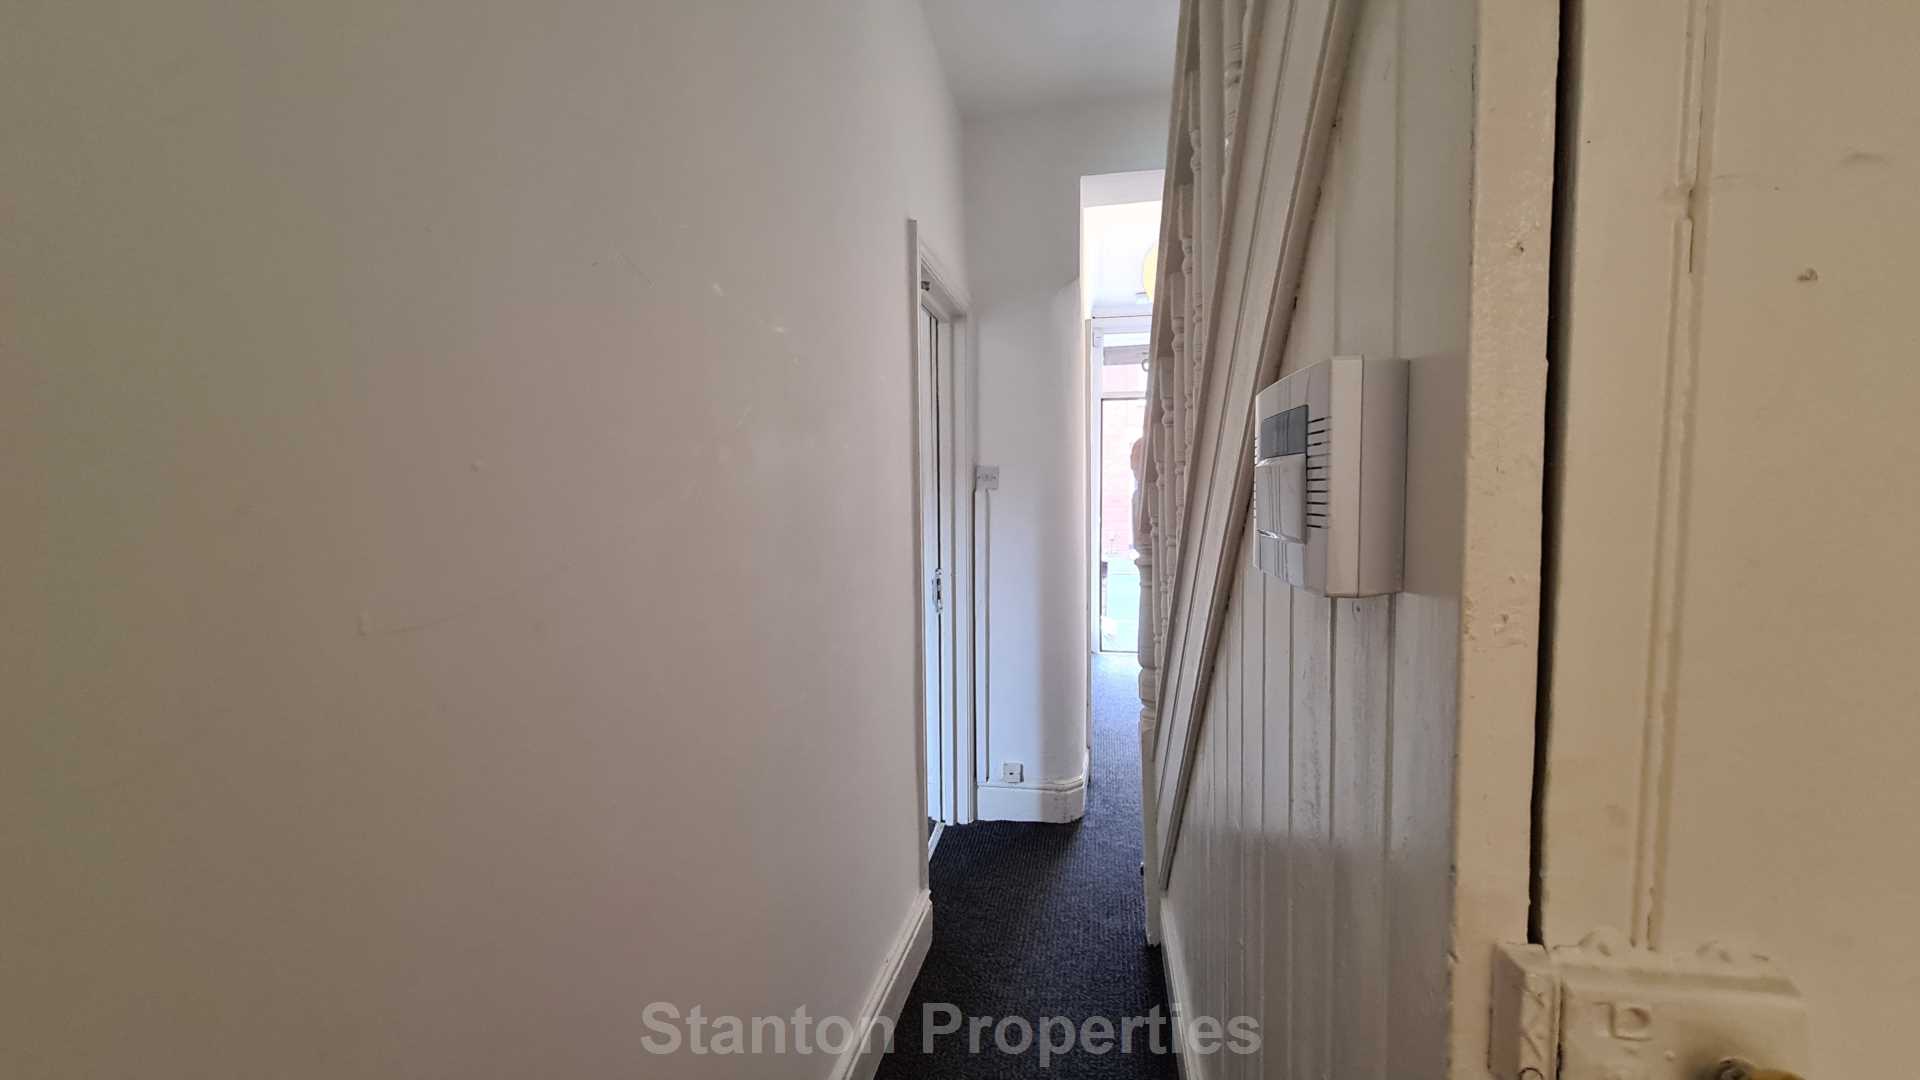 £120 pppw, See Video Tour, Mabfield Road, Manchester, Image 18